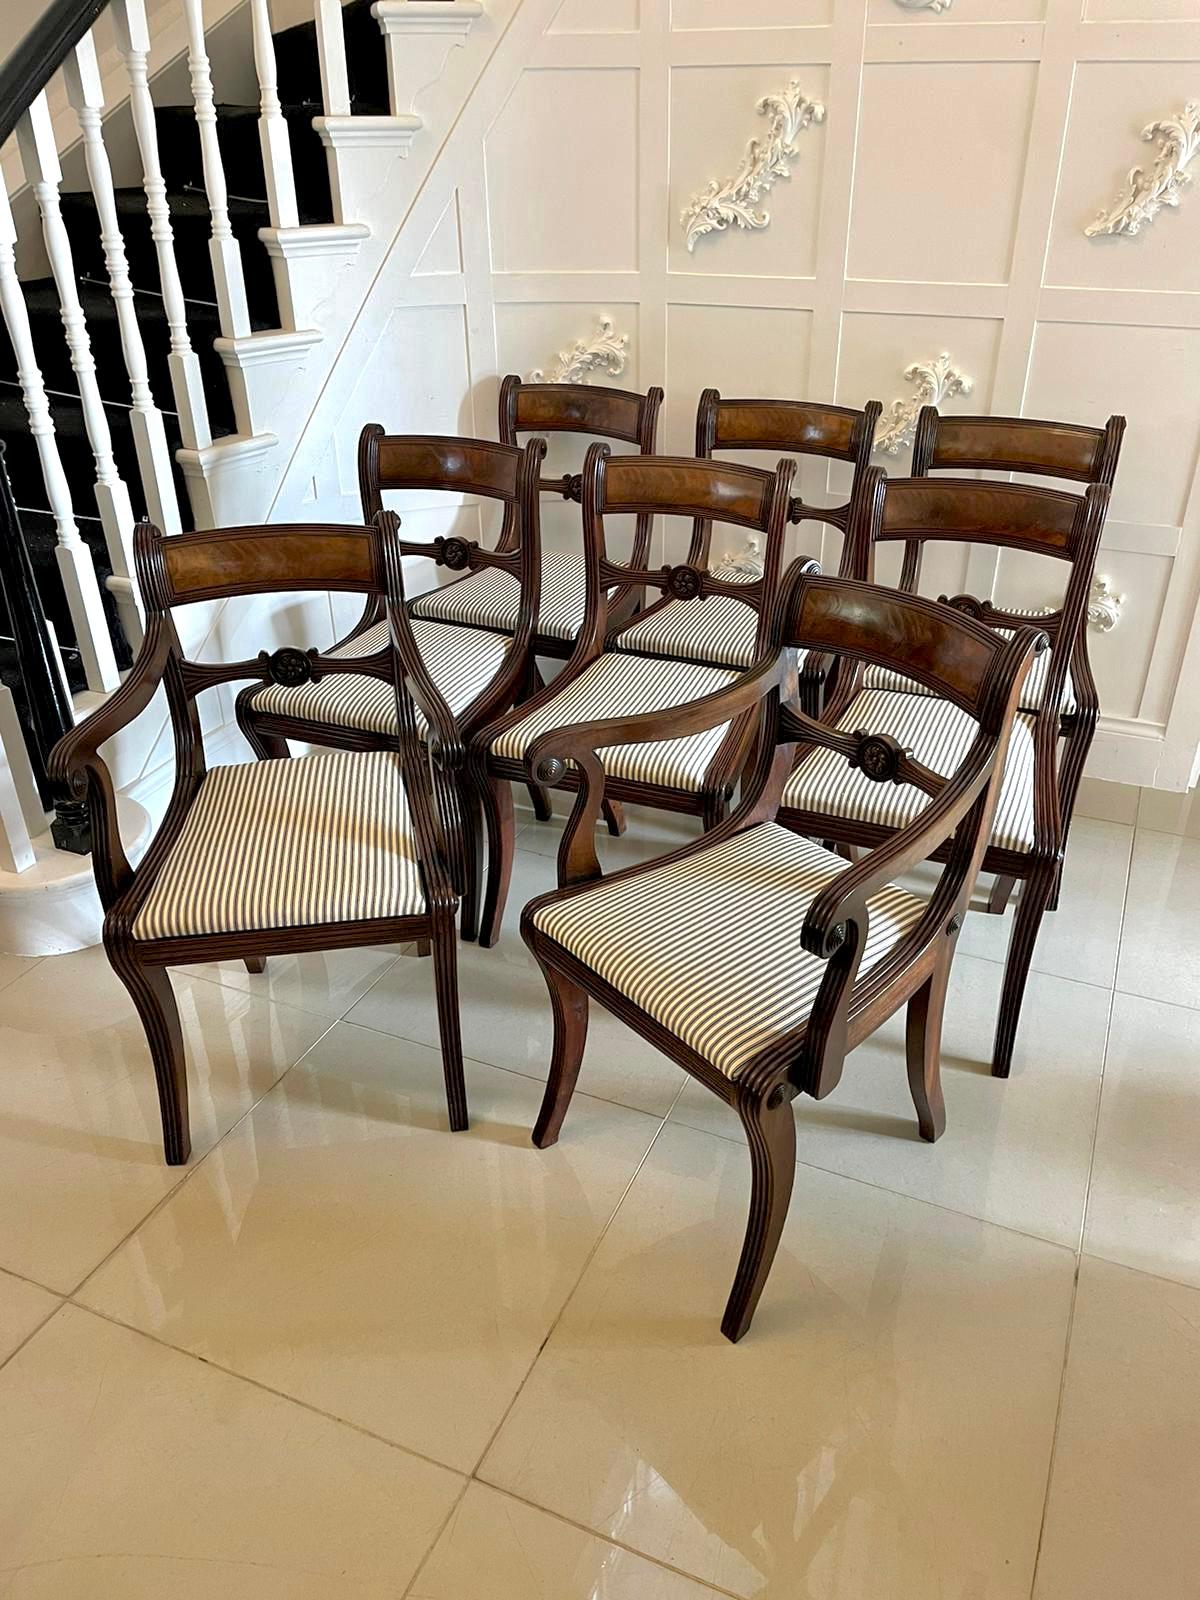 Fine quality set of 8 antique Regency mahogany dining chairs consisting of 2 carver chairs and 6 single chairs having a fine quality figured mahogany top rail with a reeded edge. The carver chairs have shaped scrolled open reeded arm, carved splat